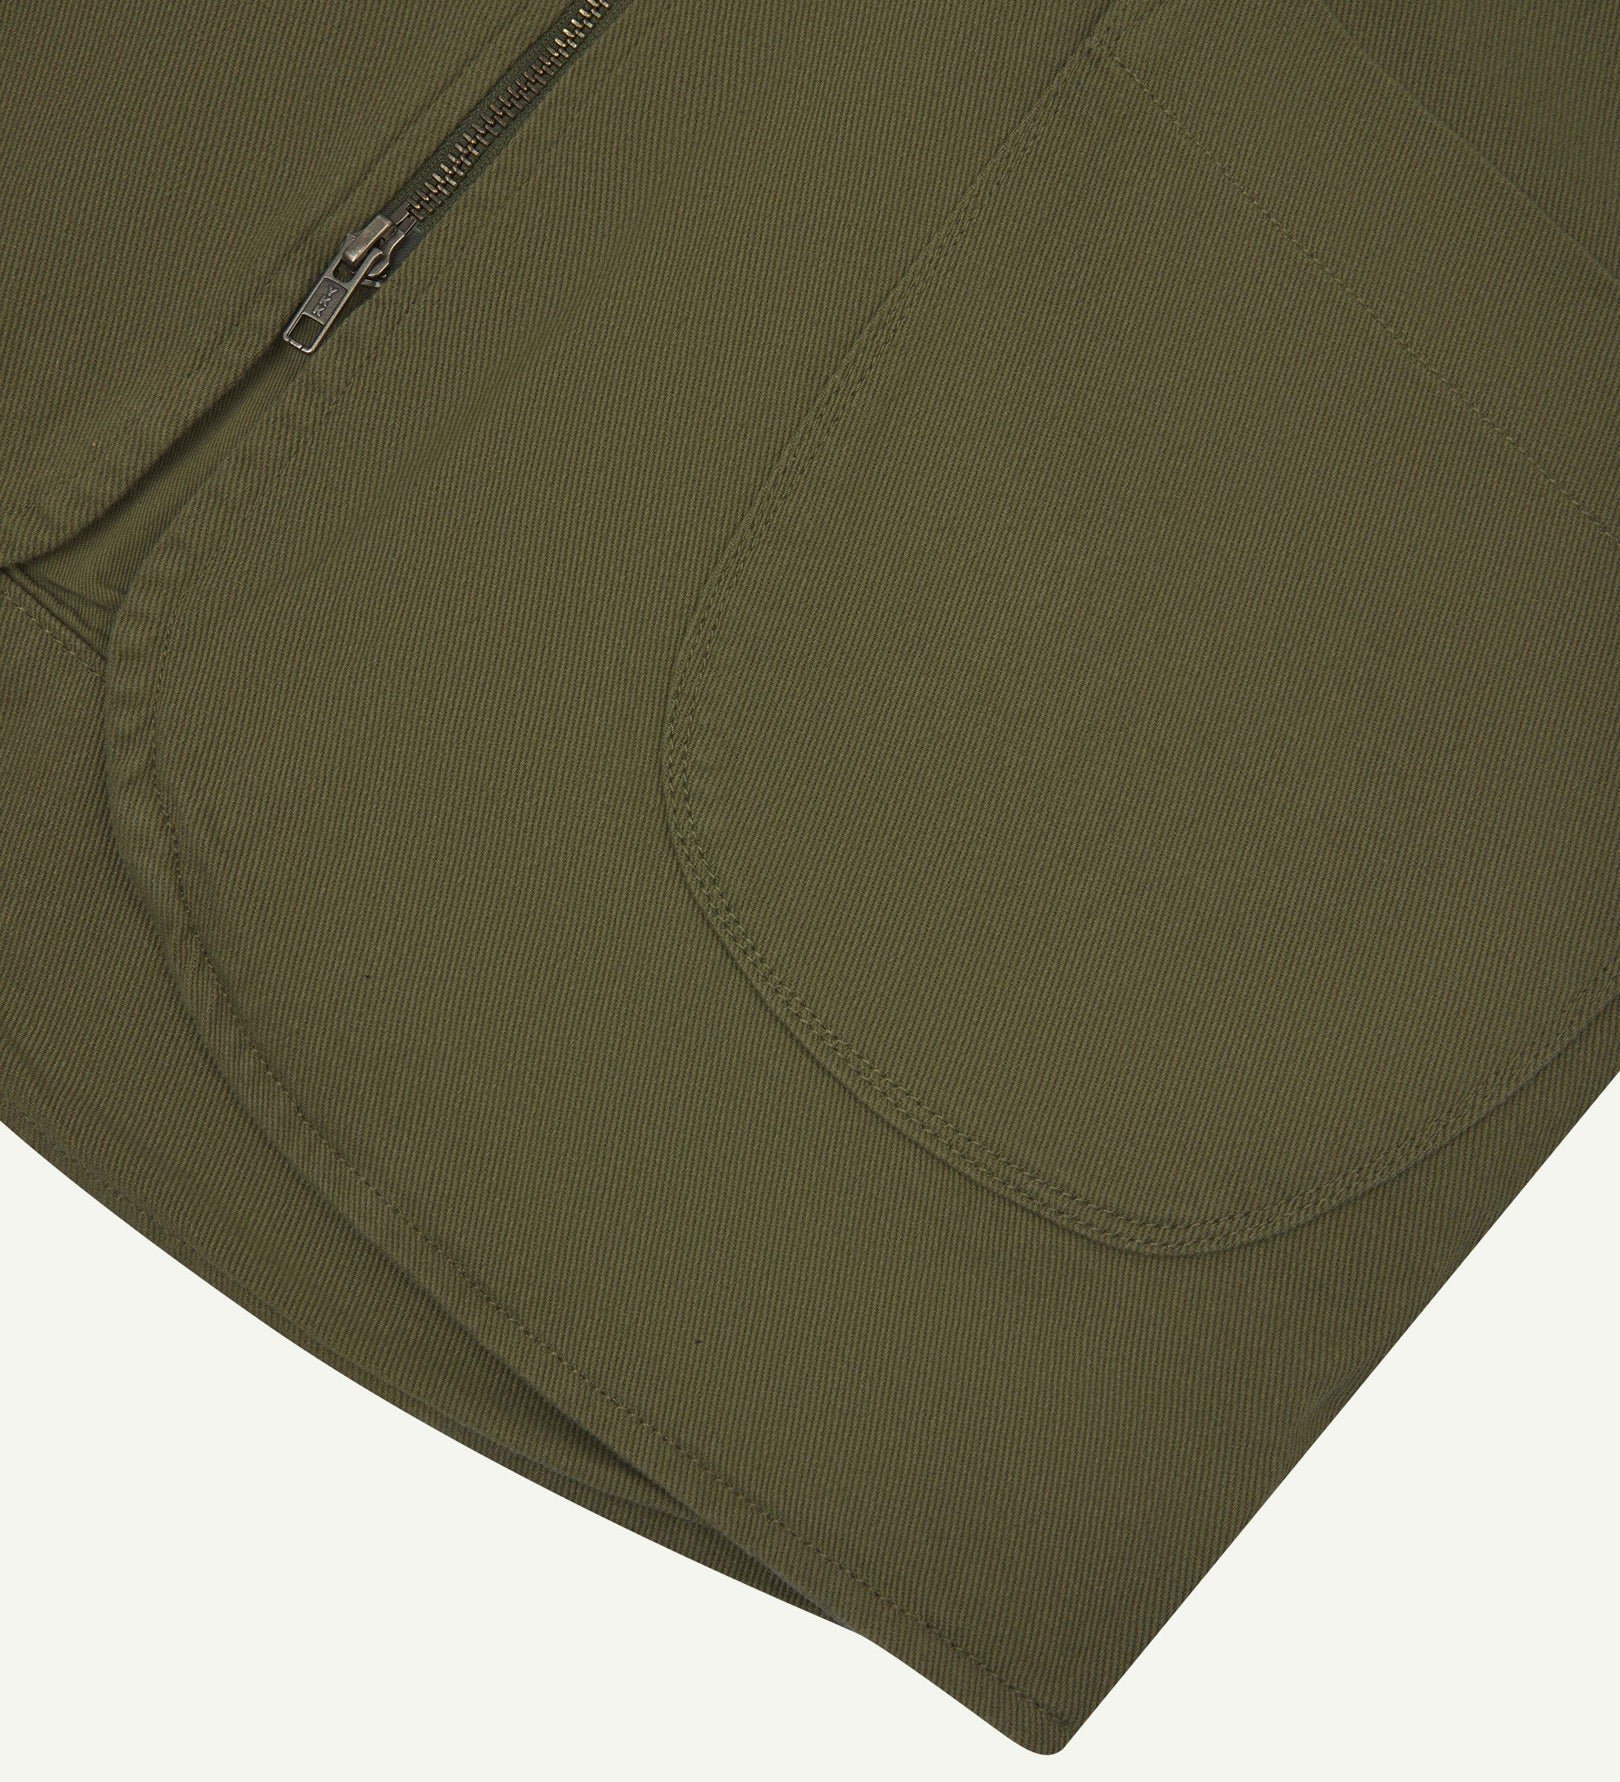 Close-up bottom-half view of #3036 moss-green organic cotton-drill vest with focus on curved pocket detail.